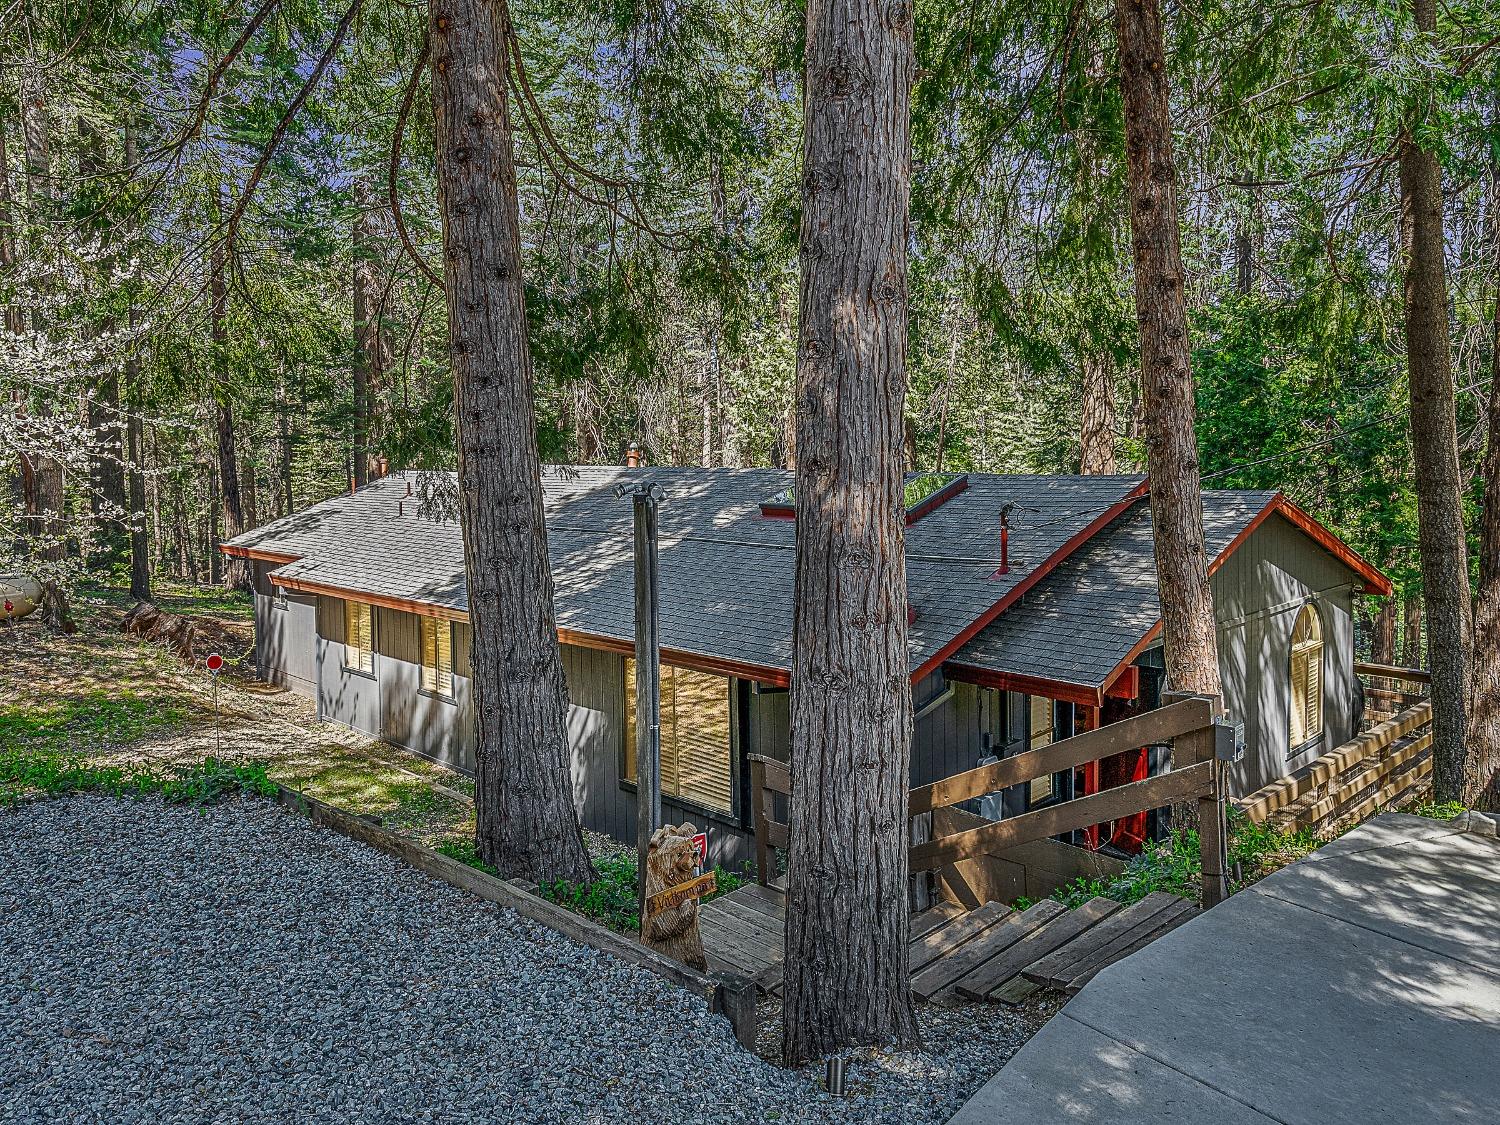 Photo of 3928 Opal Trl in Pollock Pines, CA